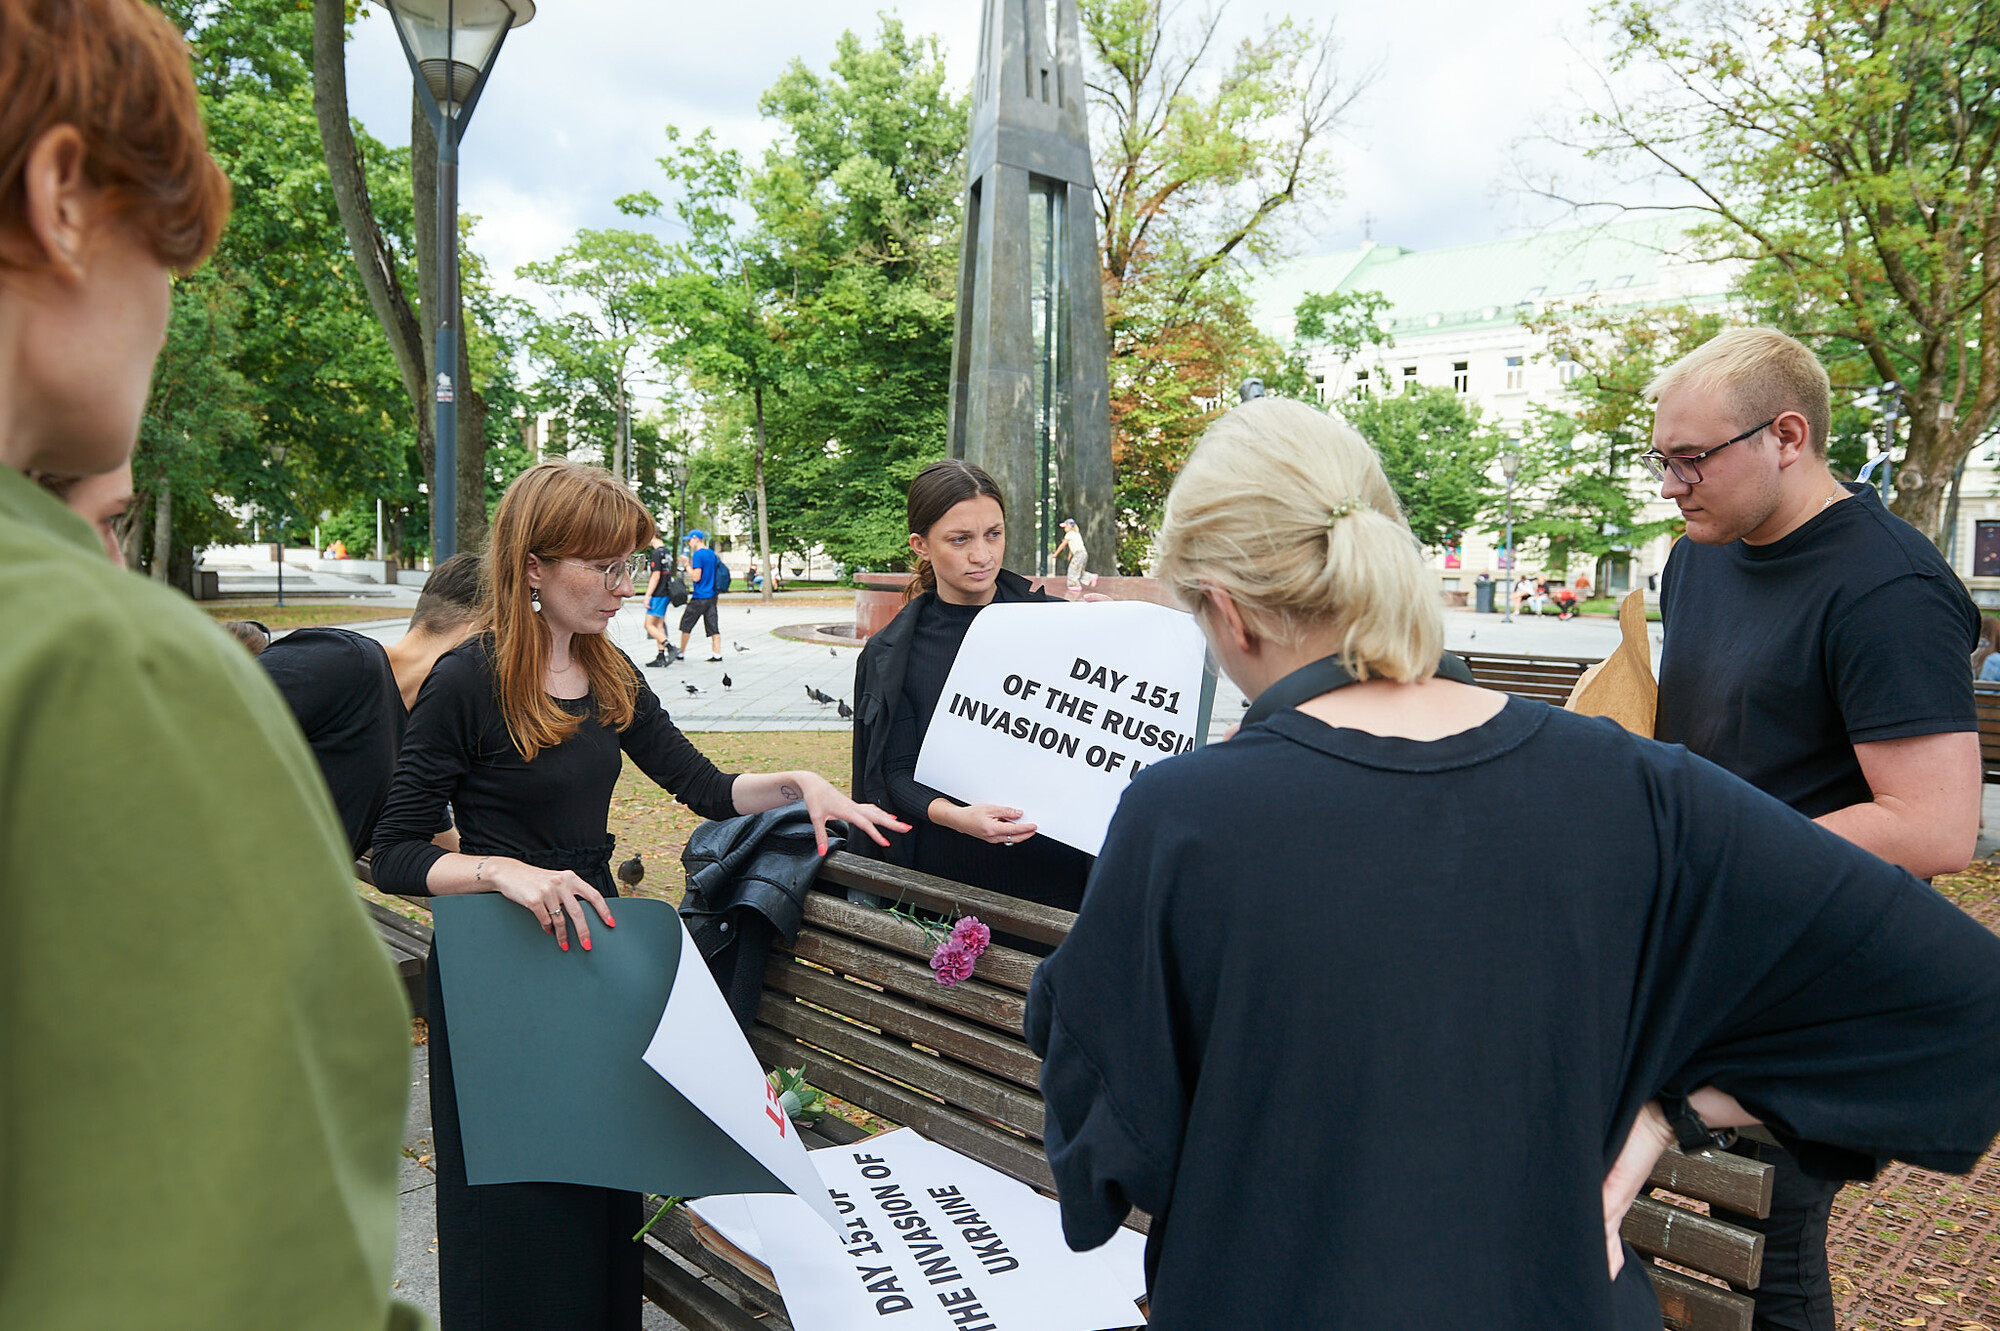 Several people in black shirts organize signs on a park bench.